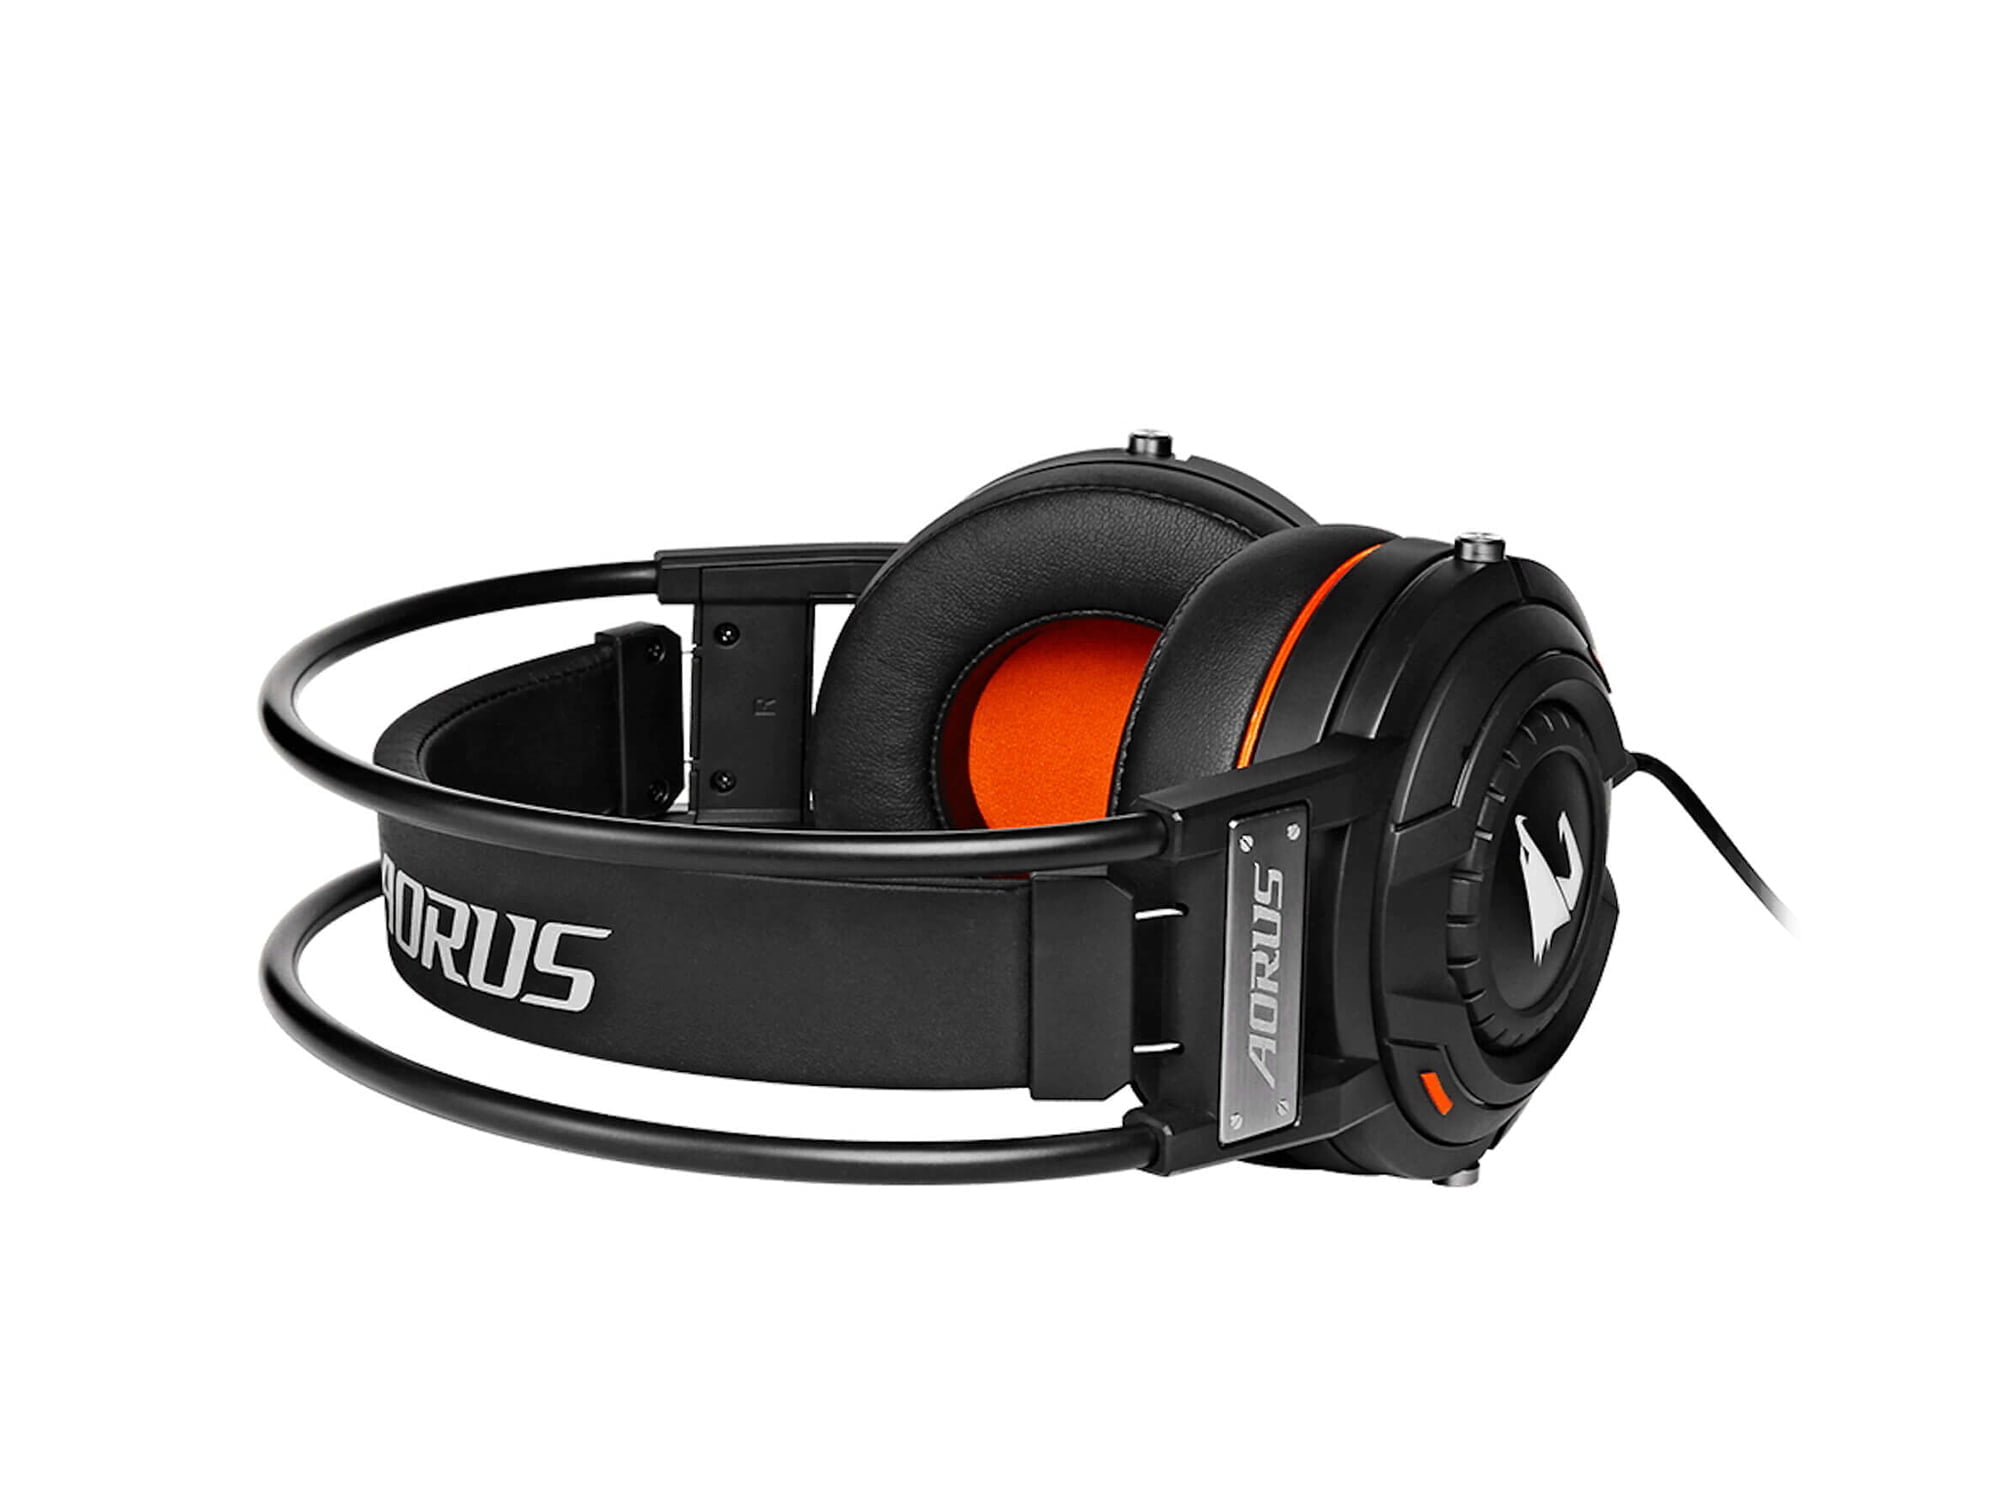 Gigabyte AORUS H5 Gaming Headset Review: Great Drivers Without Paying Extra